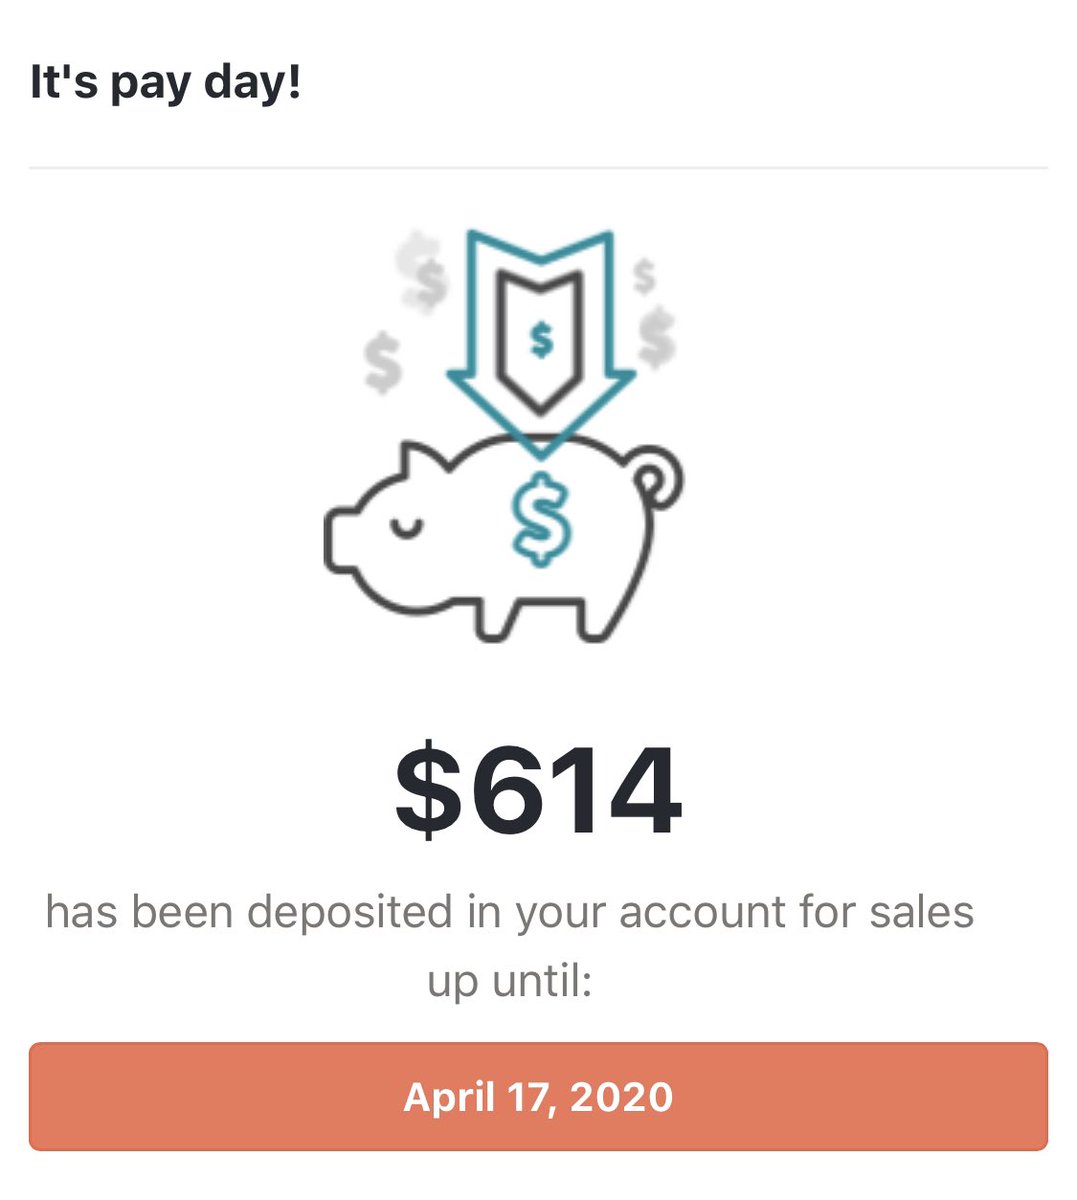 Another  @gumroad payout hit today! This every week combined with my stock market wins is opening more opportunities for me to make money! I owe it all to  @toddbillion &  @CJ_Johnson17th for “teaching me how to fish”.  #Grateful